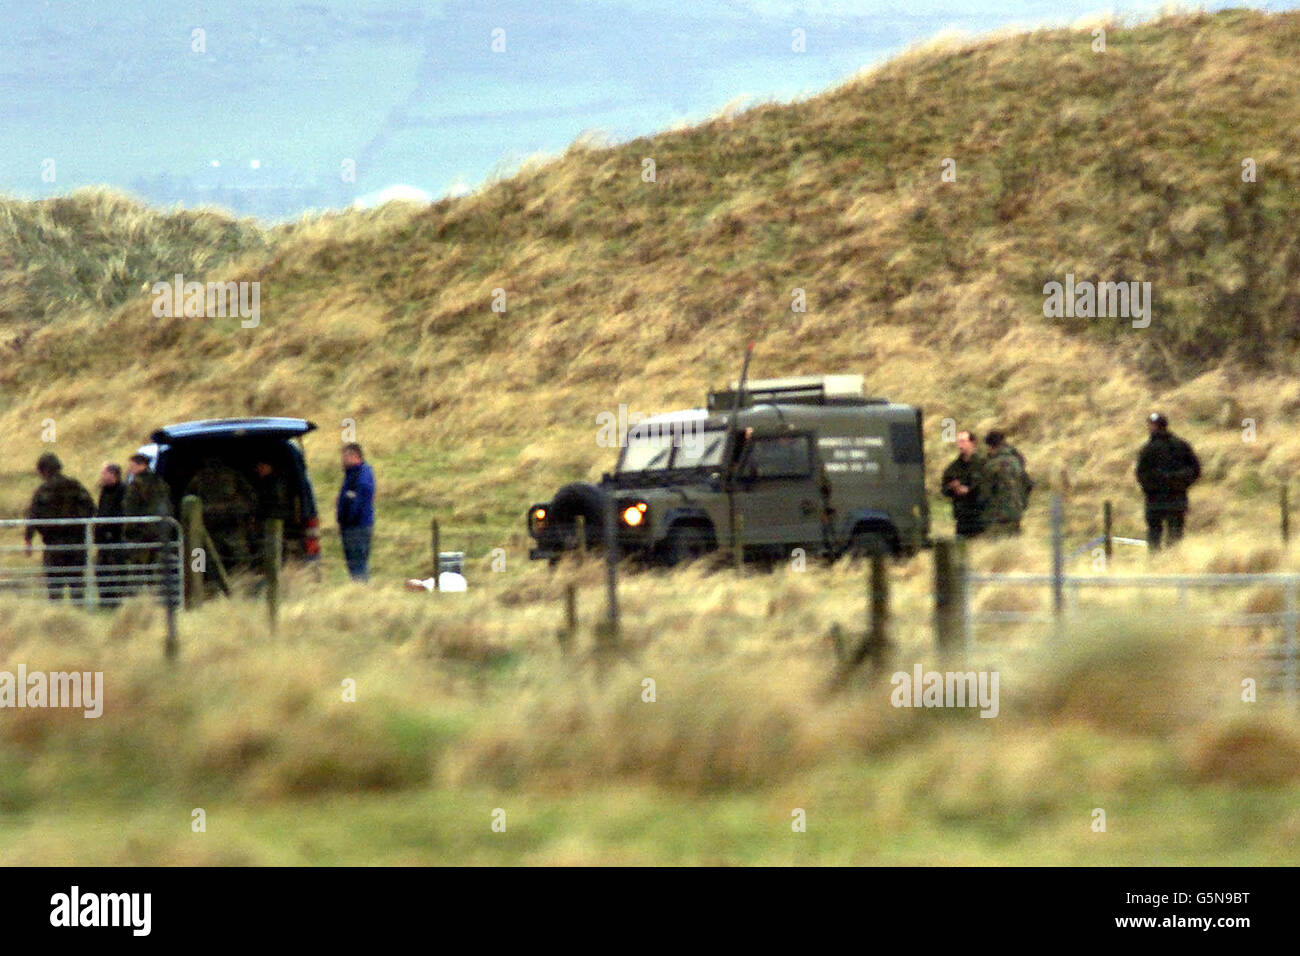 Army Bomb experts at the scene of an expolsion, at a Military Training Camp at Magilligan, Co. Londonderry, Northern Ireland. Dissident republicans were tonight believed to be behind a bomb attack which left a civilian security guard critically injured. *The 48-year-old Ministry of Defence worker sustained severe injuries to his lower body after he picked up the device at a perimeter fence of the training centre at Benone beach near Limavady. Stock Photo